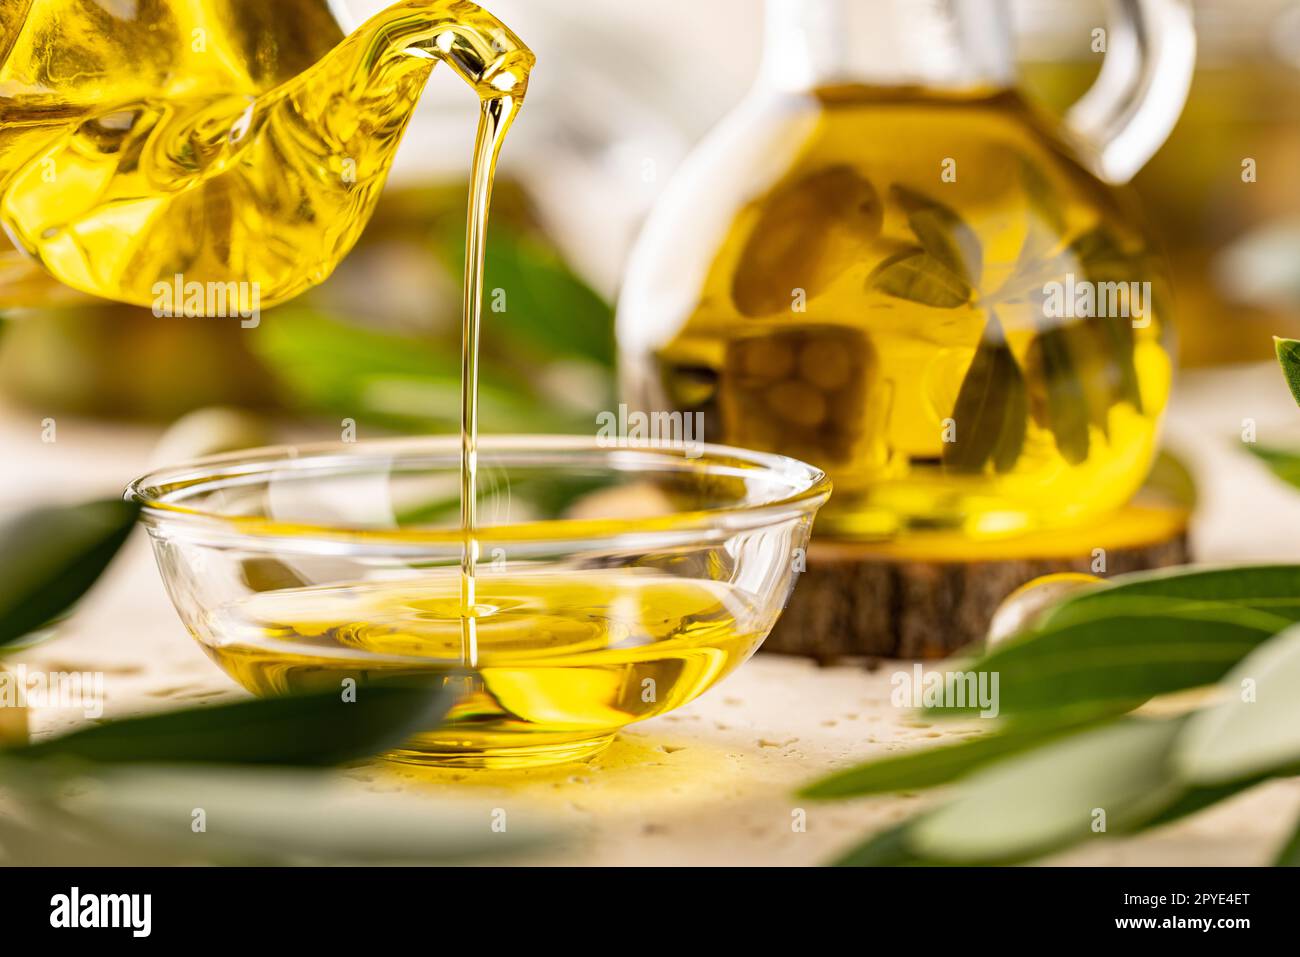 Bottle pouring virgin olive oi Stock Photo